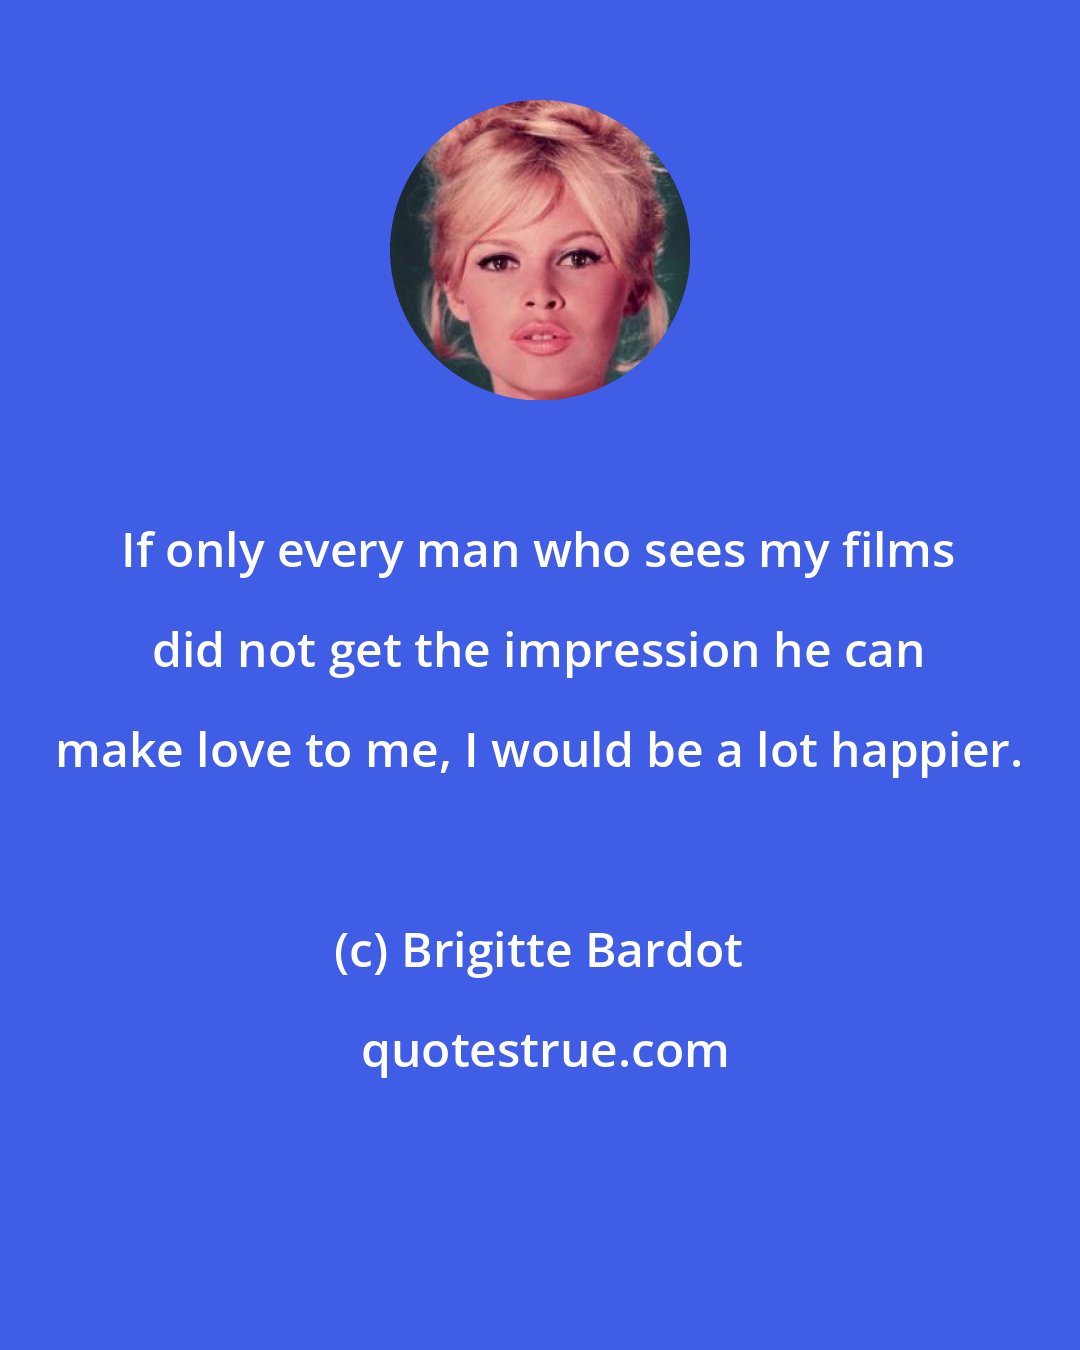 Brigitte Bardot: If only every man who sees my films did not get the impression he can make love to me, I would be a lot happier.